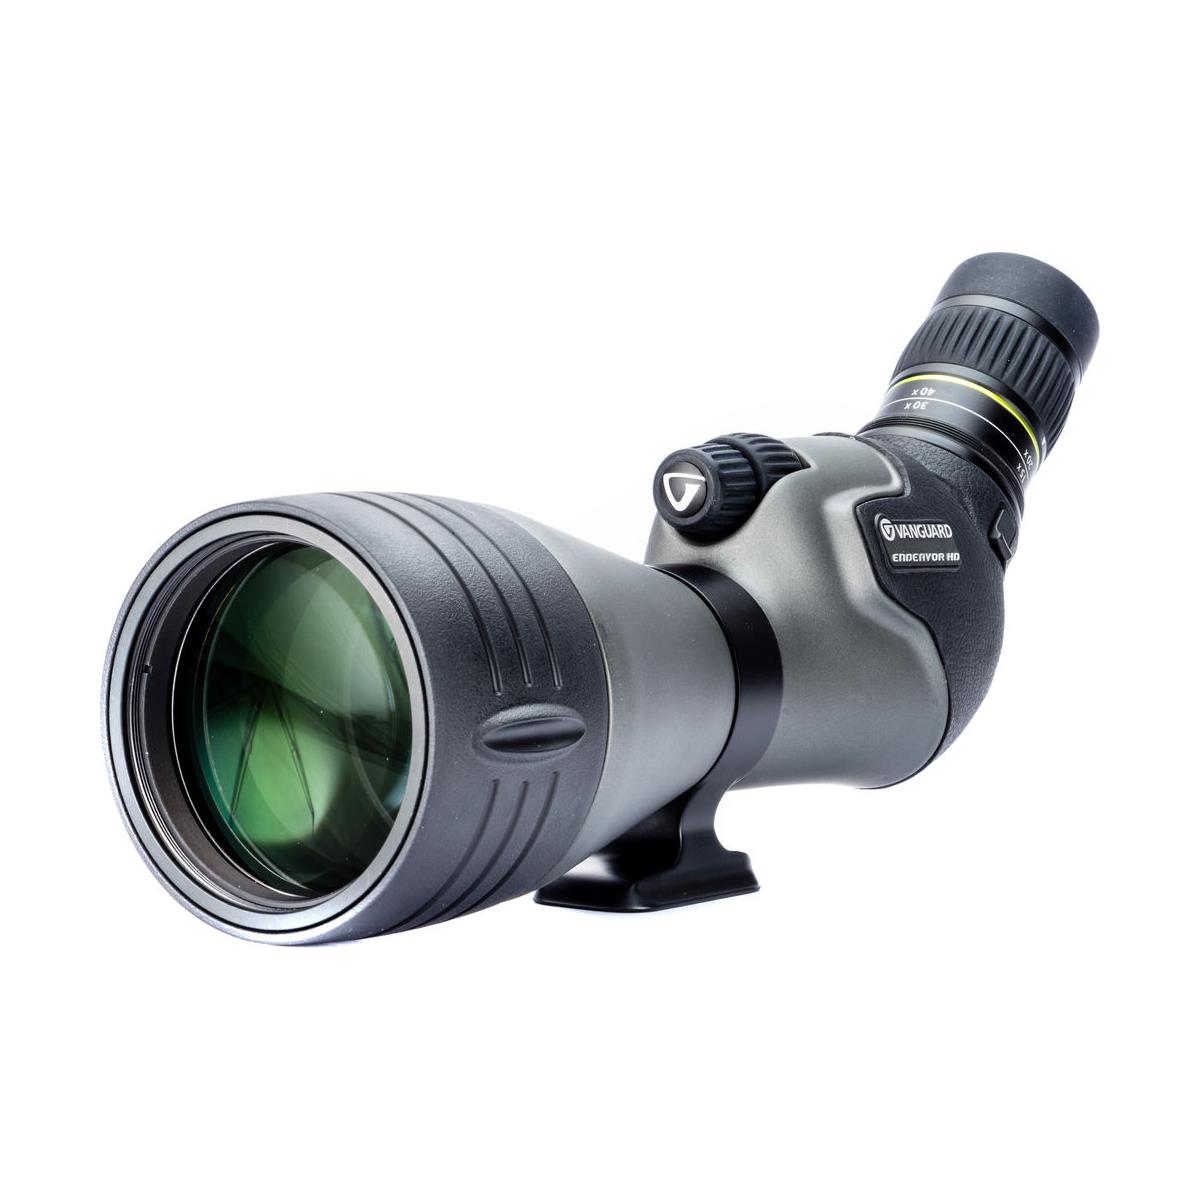 Vanguard Endeavor HD 20-60x82 Spotting  Scope (Angled Viewing)